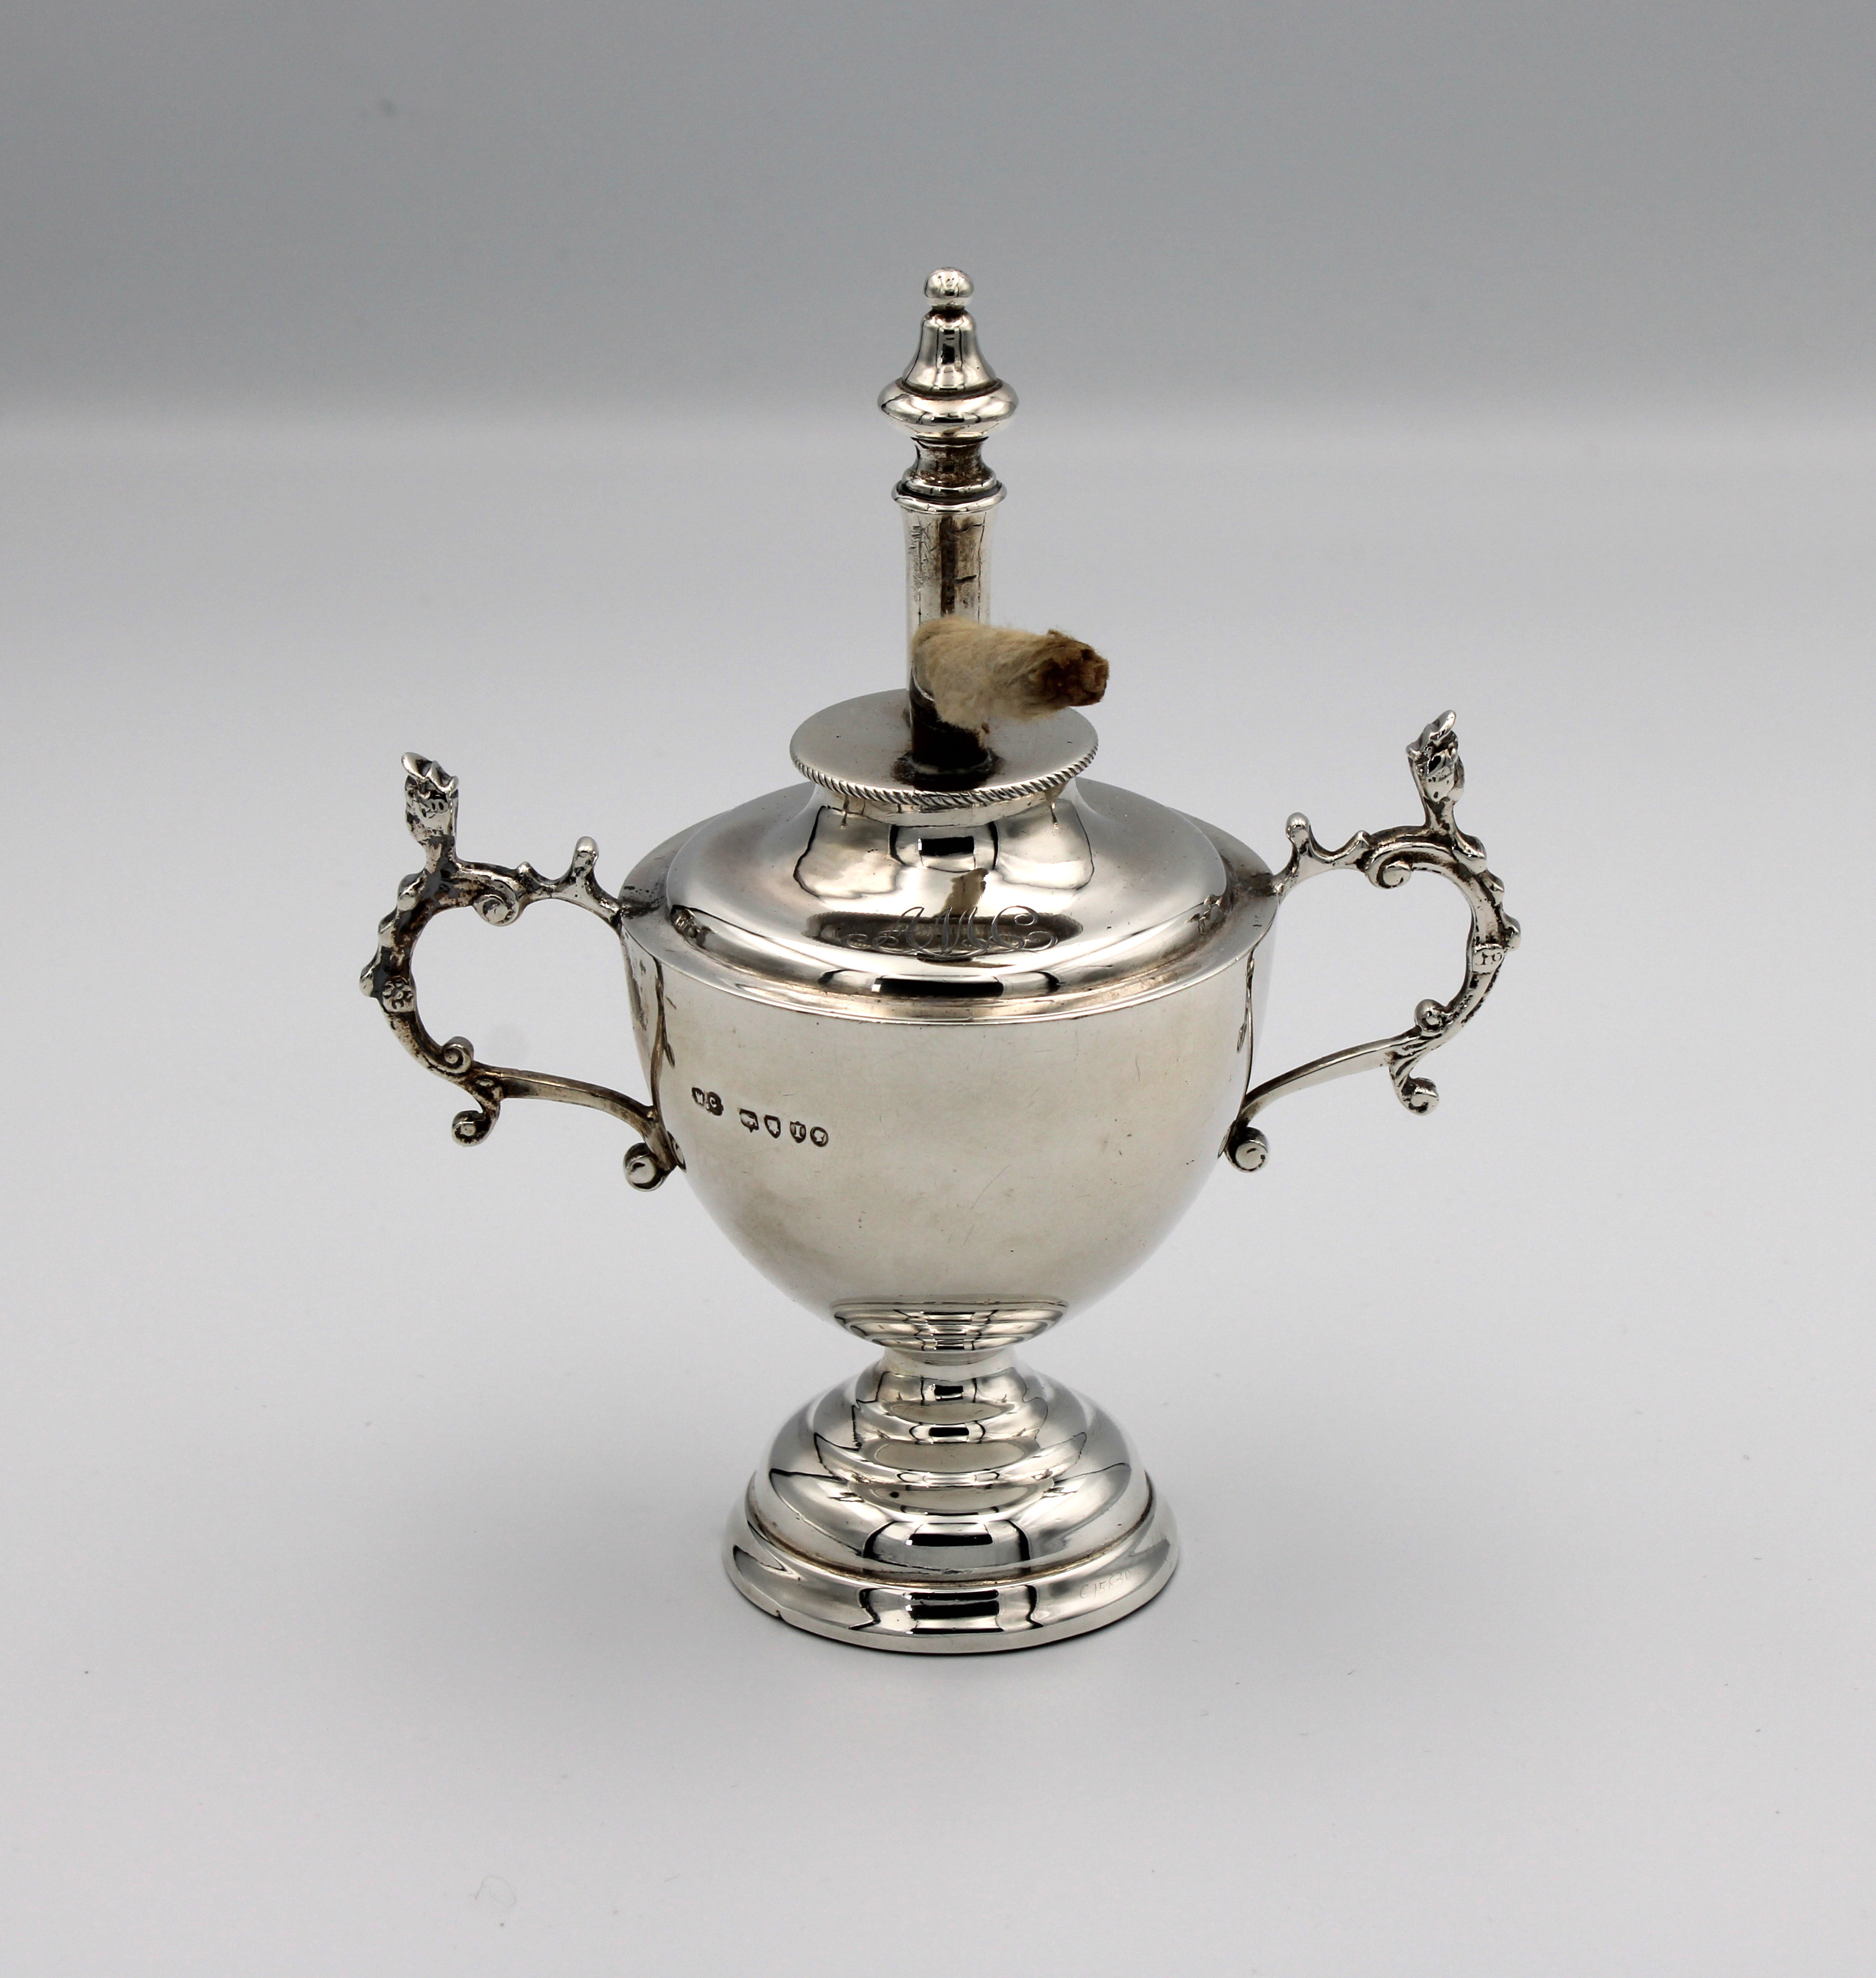 A Victorian silver table lighter fashioned as a trophy cup / urn